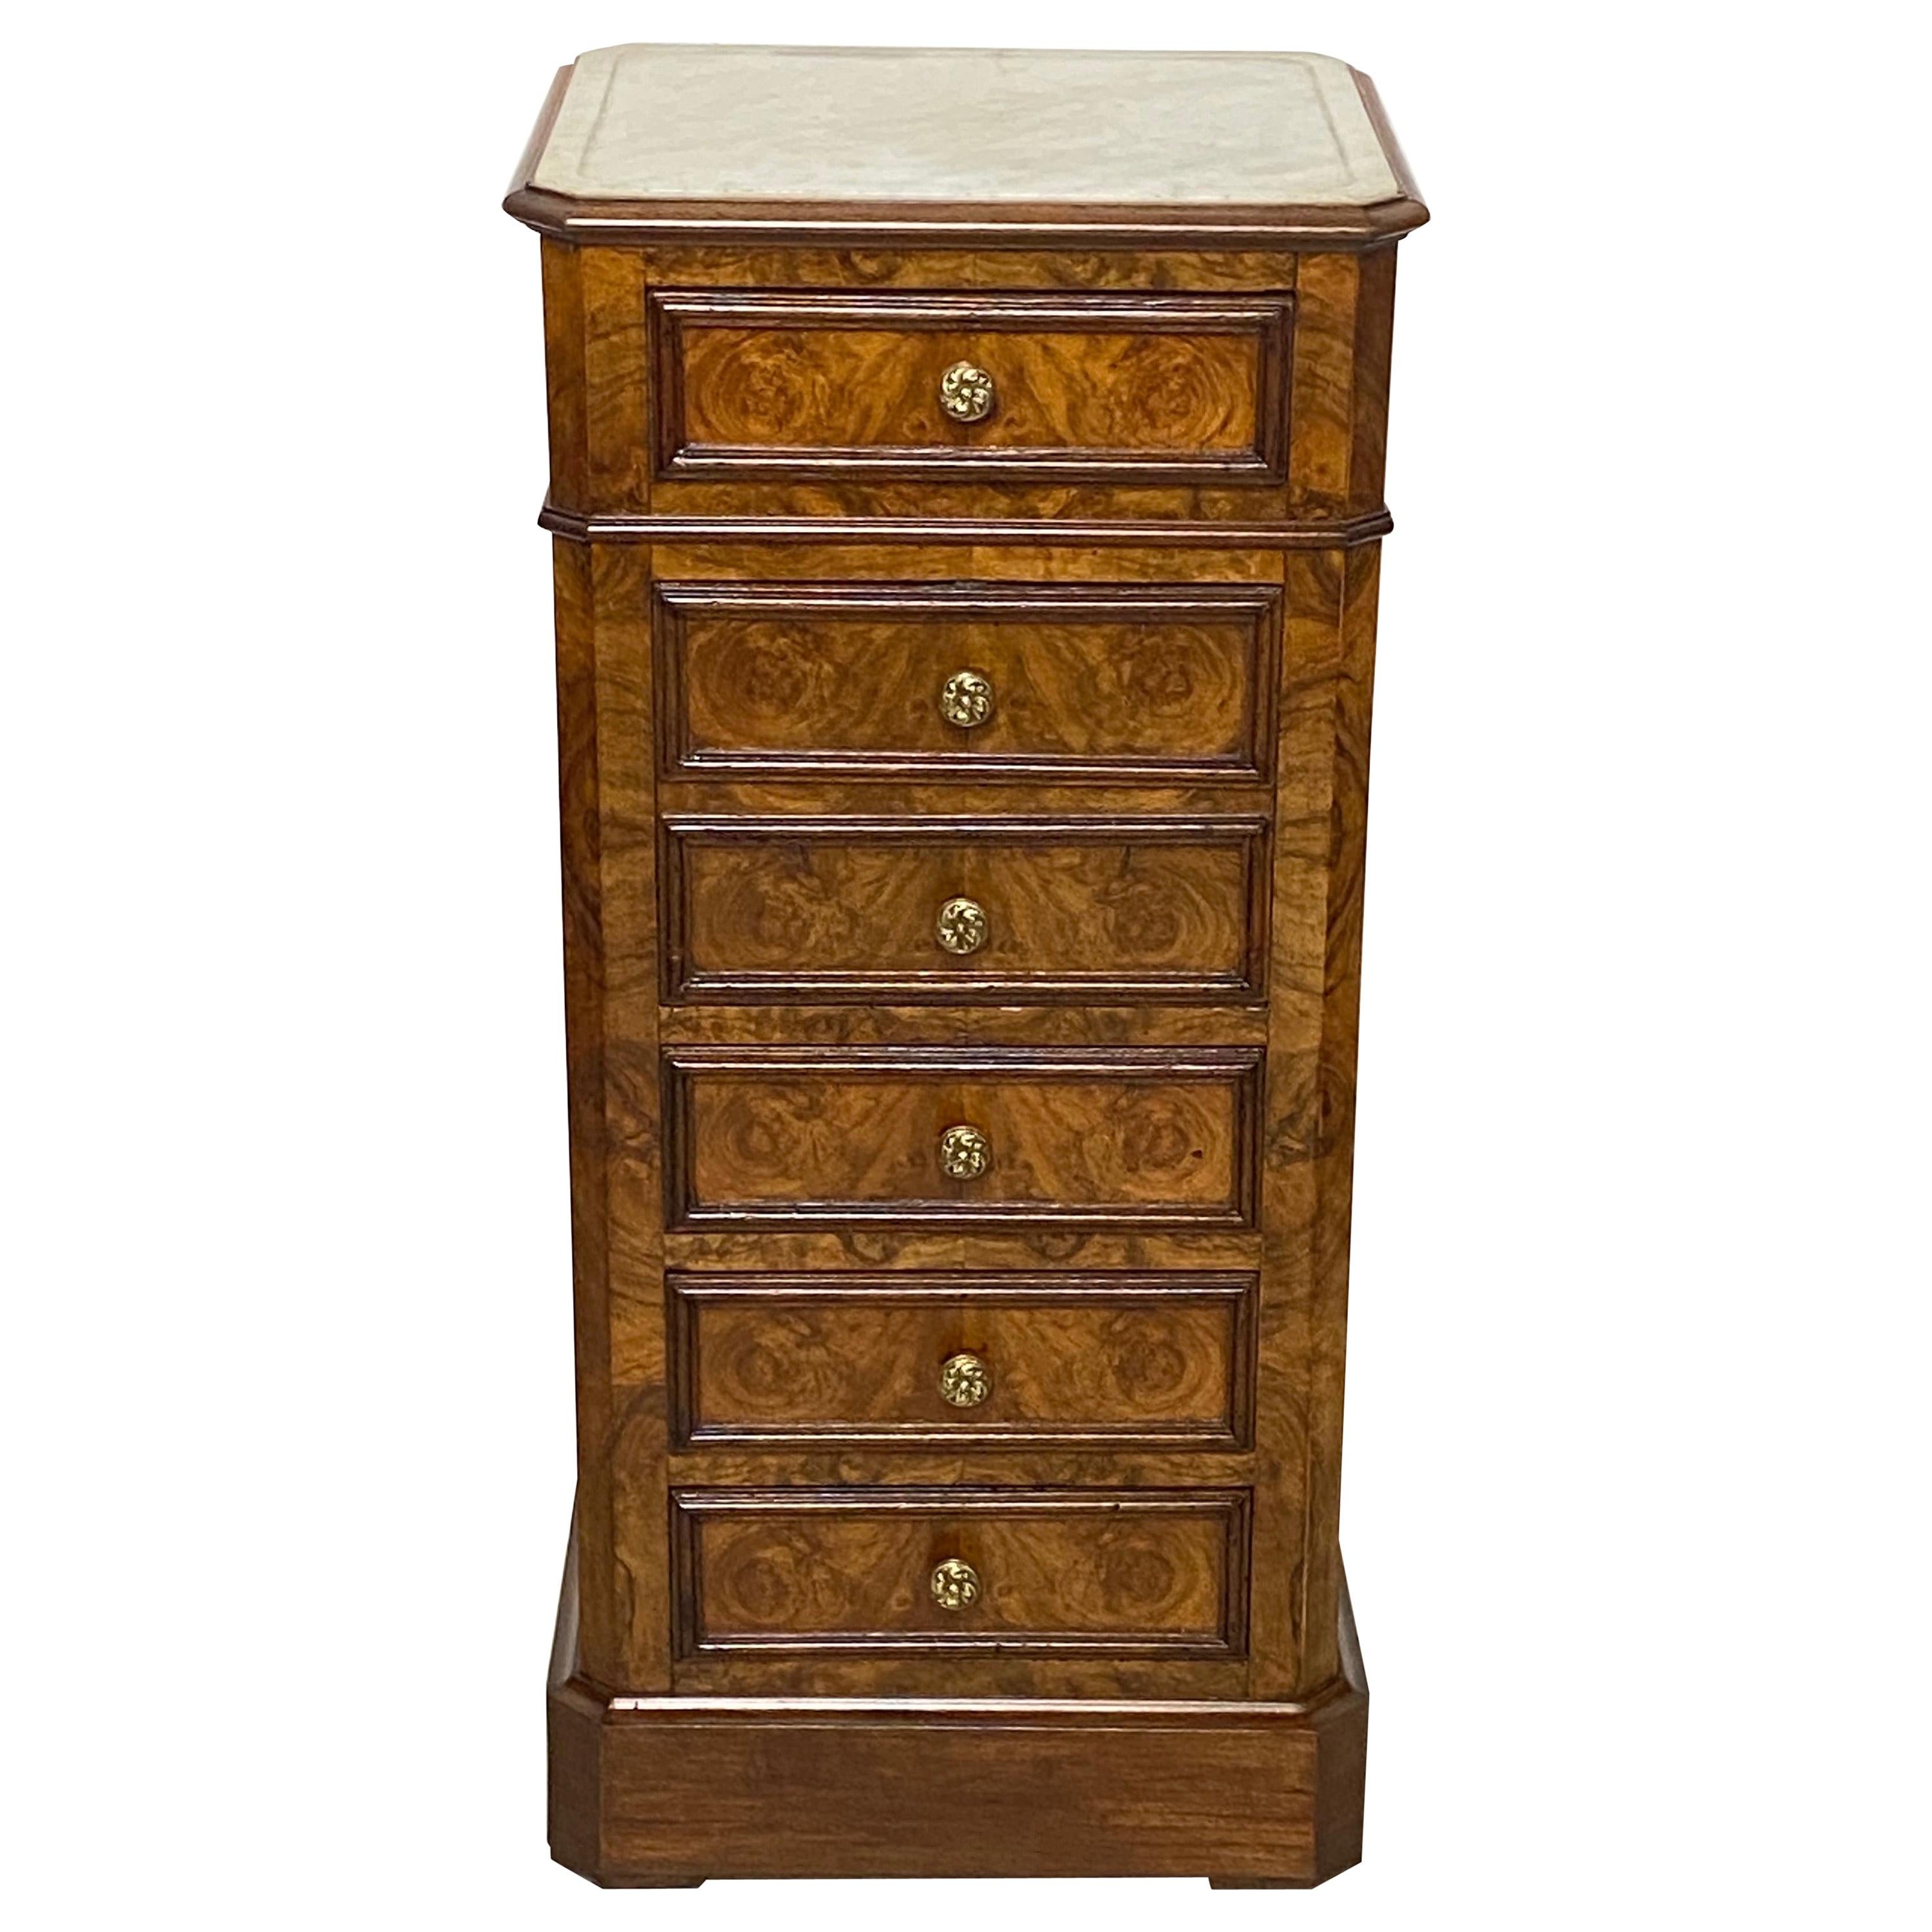 French Burled Walnut and Marble Bedside Commode Cabinet, 19th Century